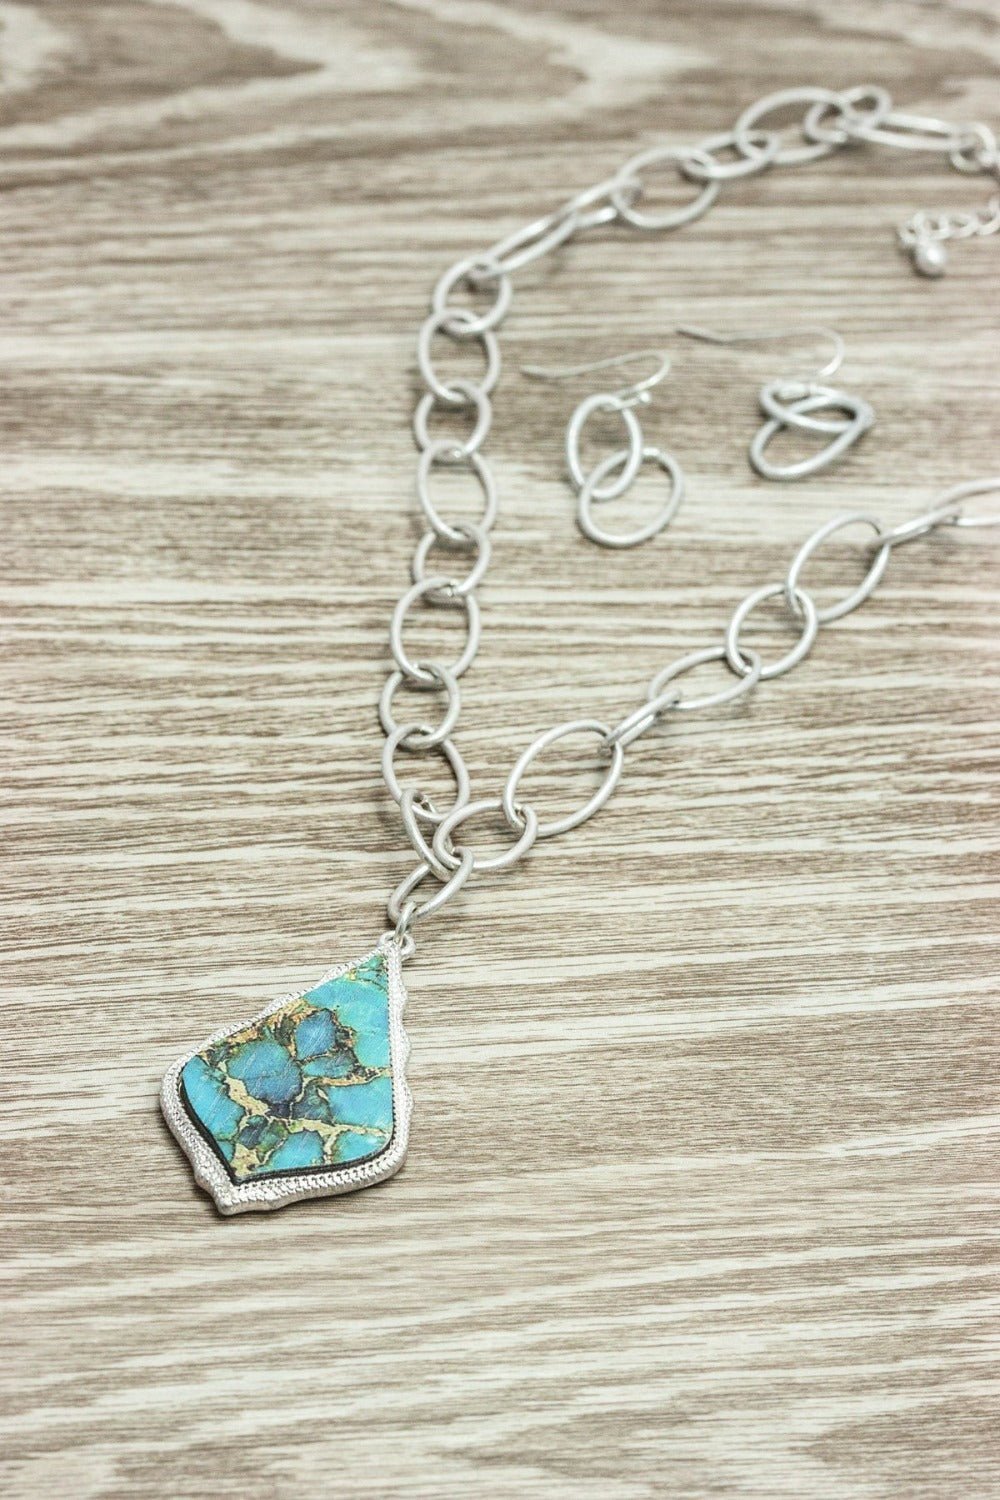 Silver Link Necklace With Teal Pendant - Lucy Doo